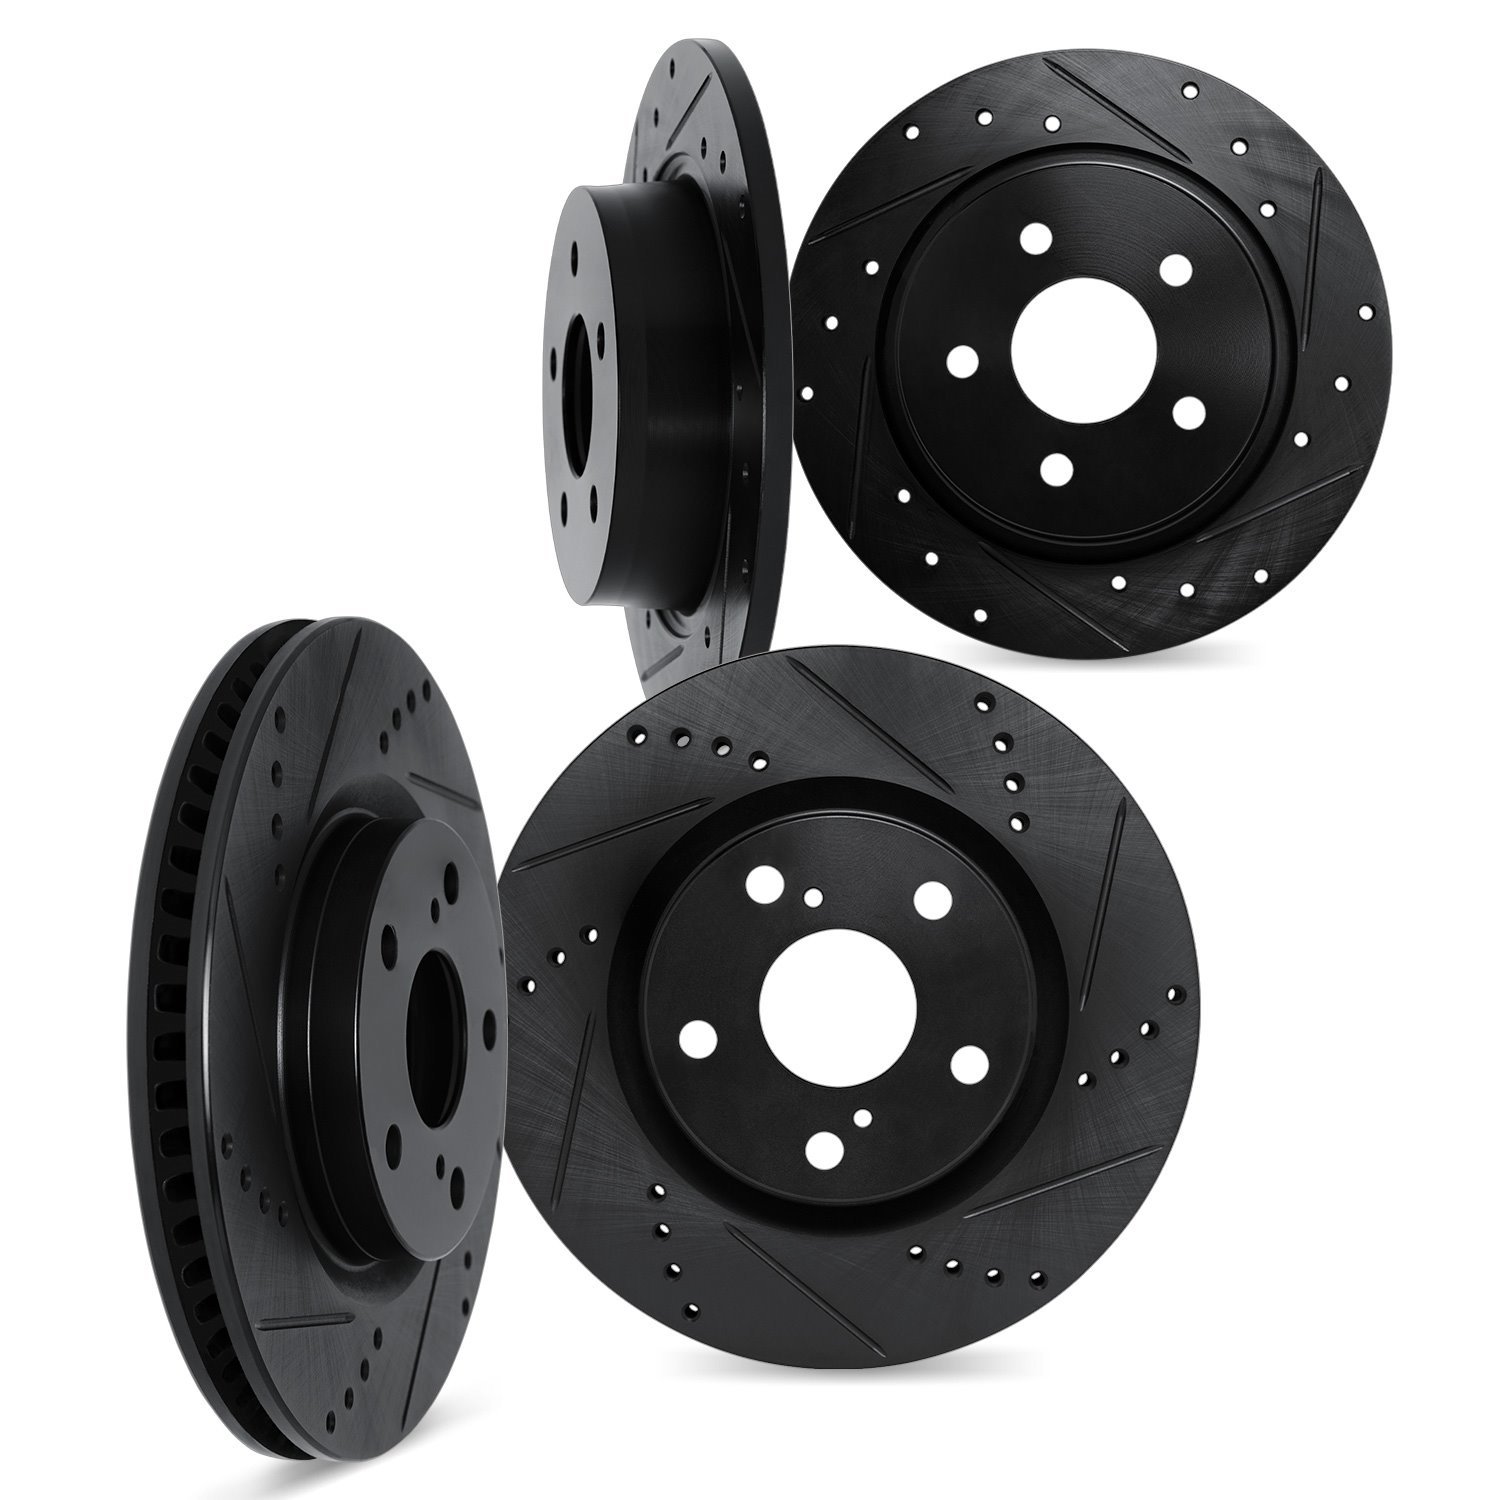 8004-39005 Drilled/Slotted Brake Rotors [Black], Fits Select Mopar, Position: Front and Rear